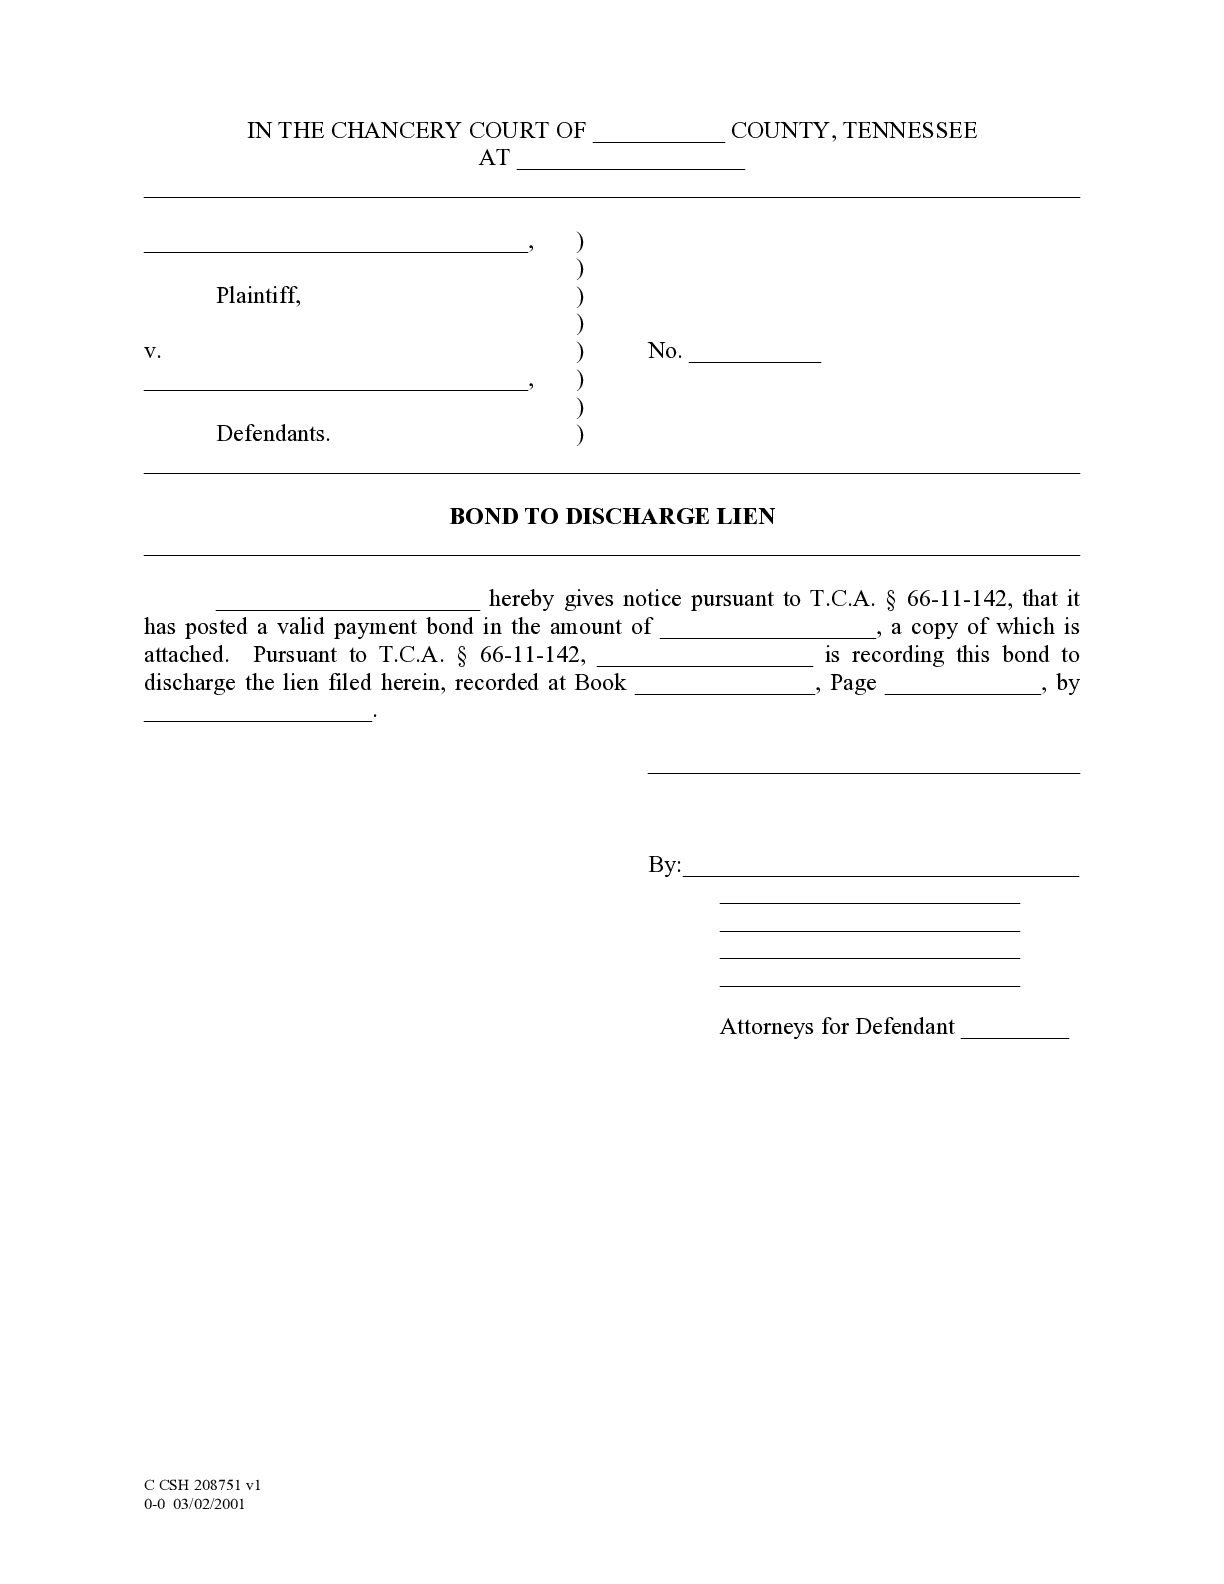 Tennessee Bond to Discharge Lien Form